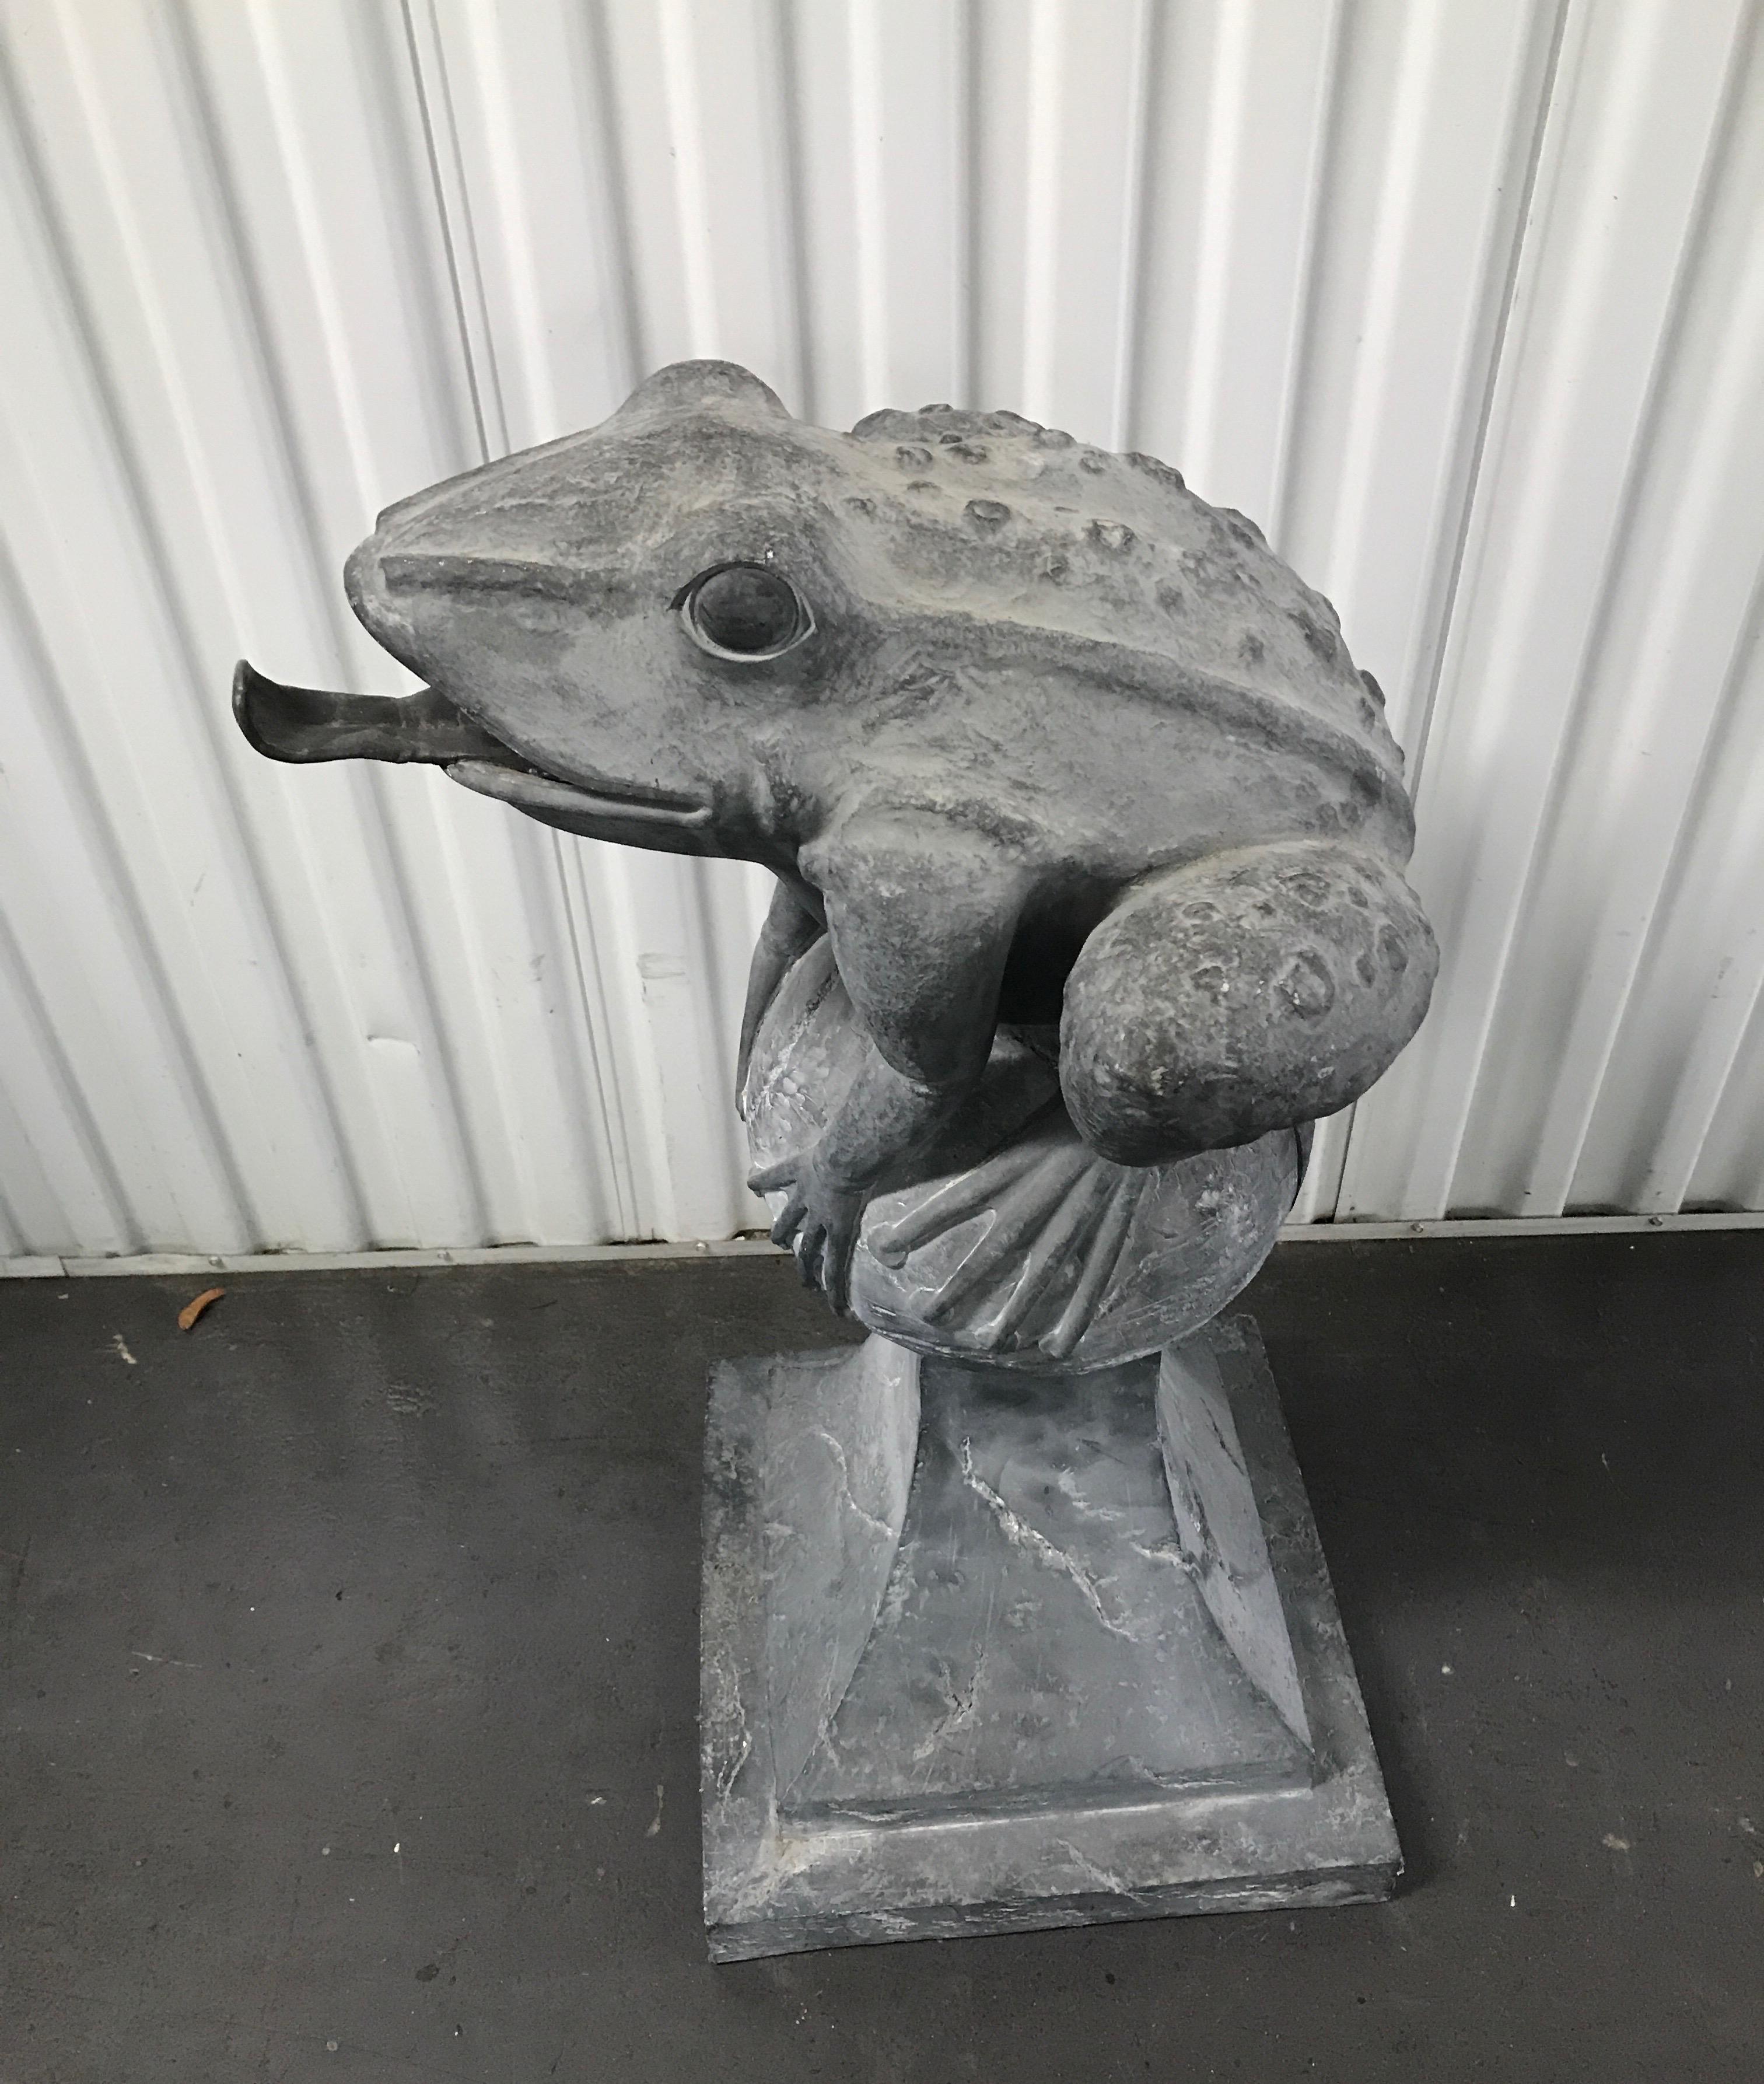 Whimsical Large Jumping Frog Sculpture 2